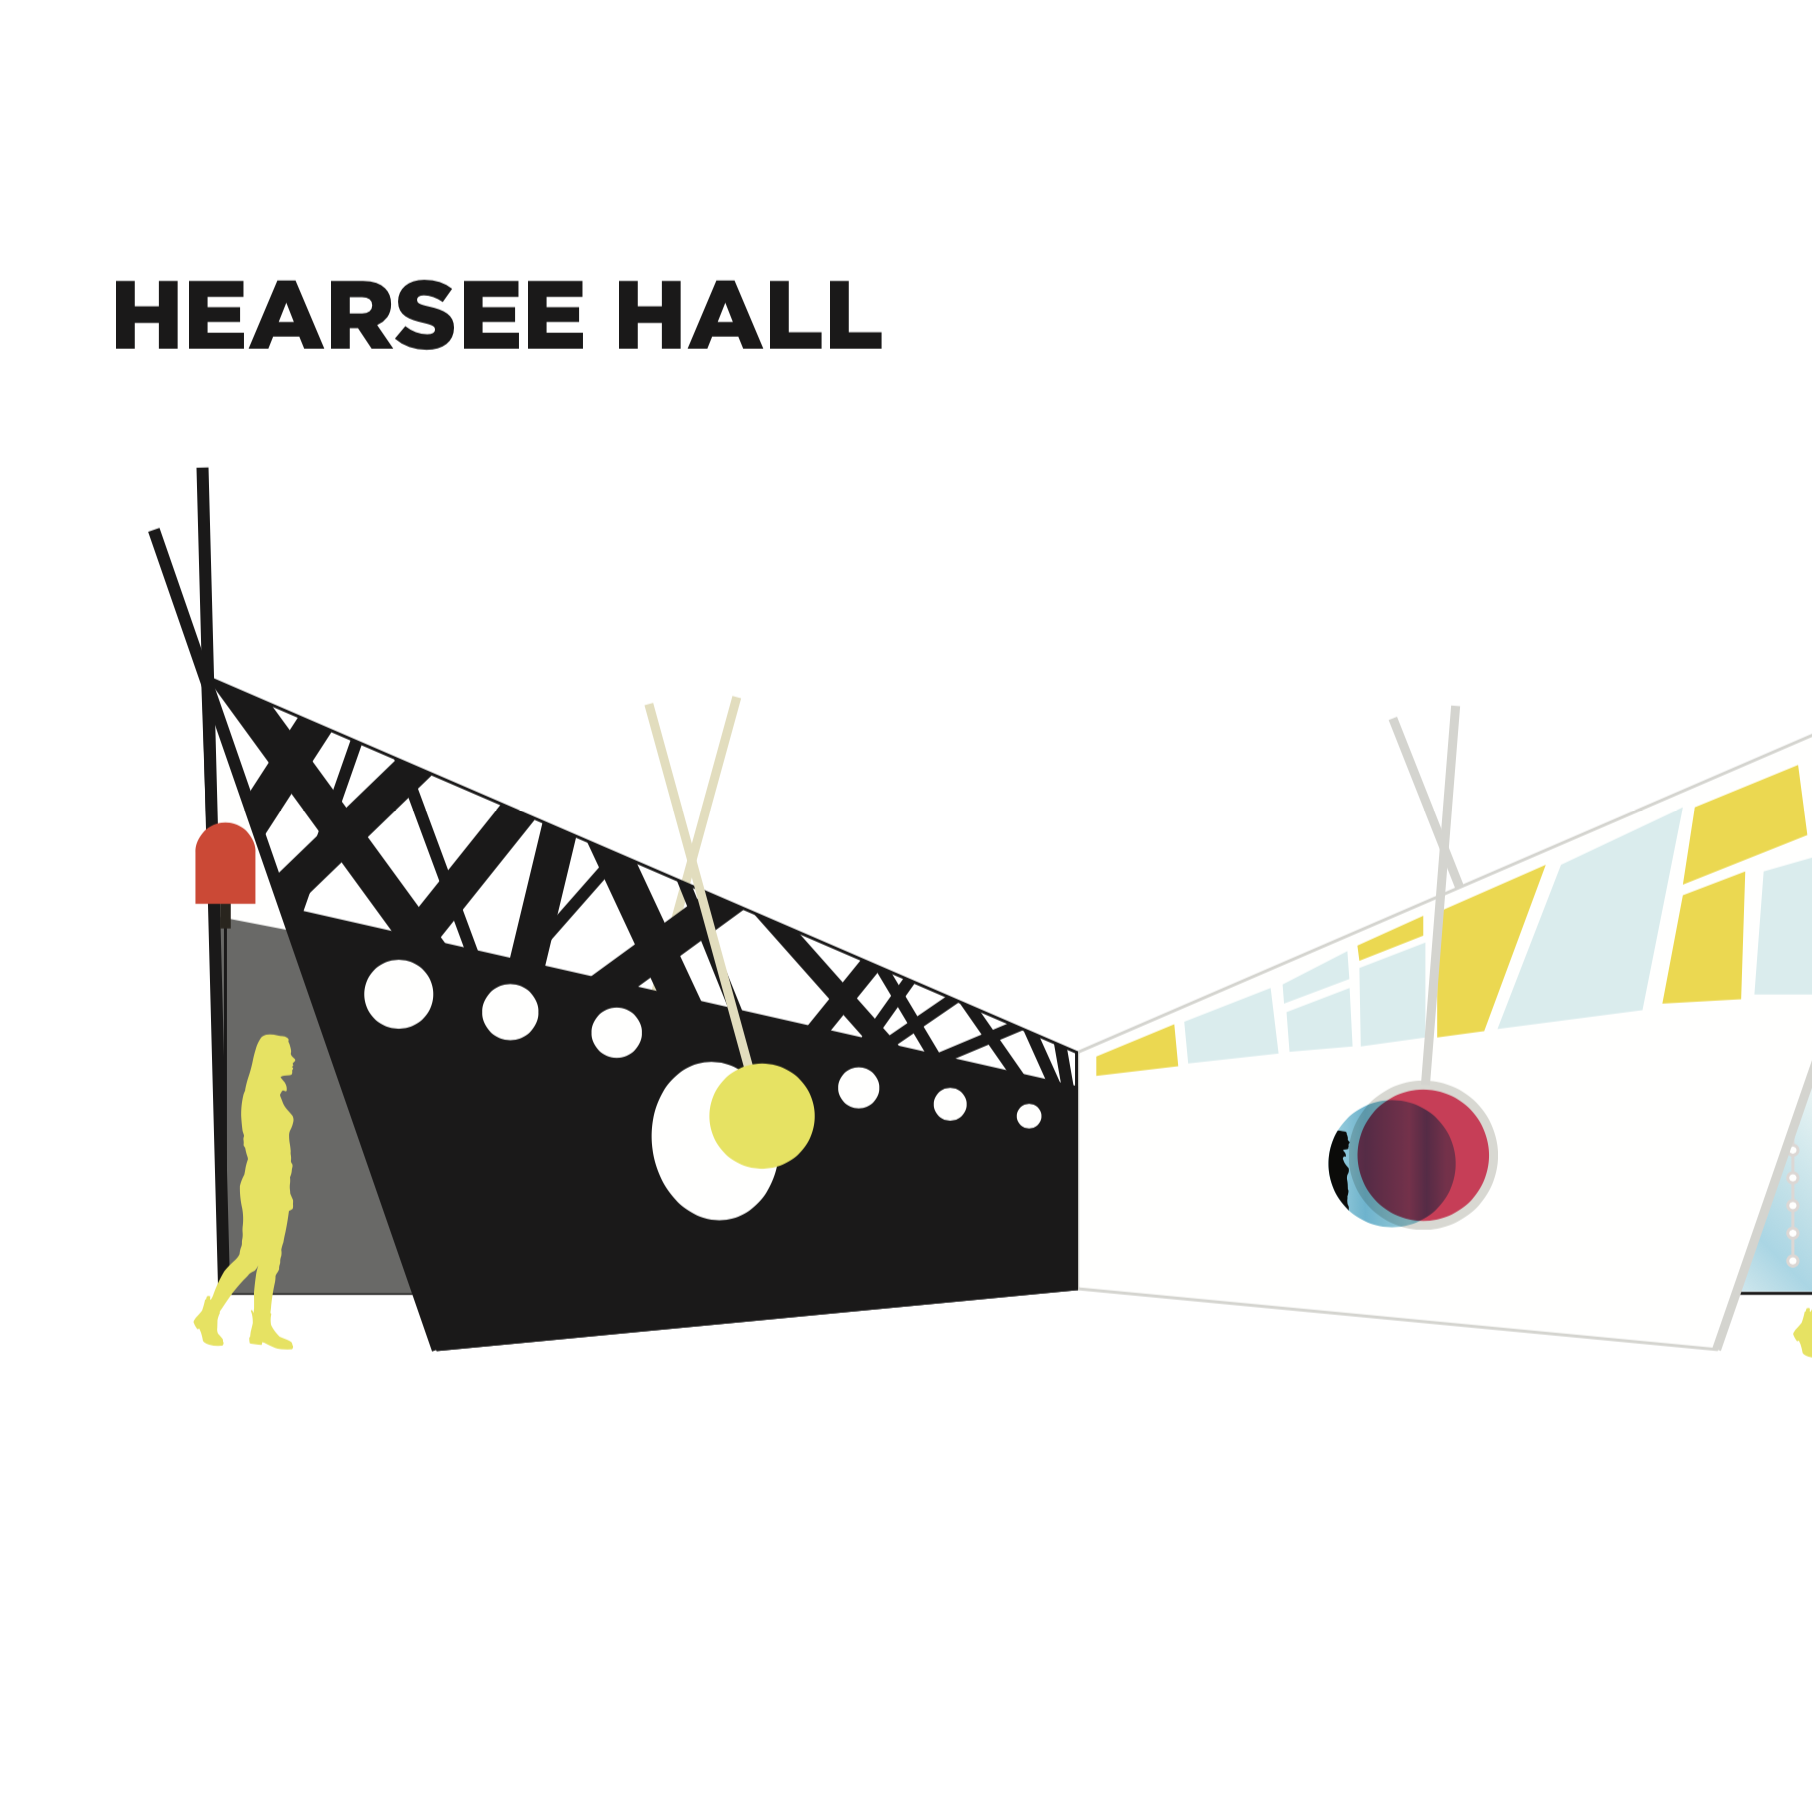 A computer drawing of a triangular -shaped hallway. The words 'Hearsee Hall' appear above it.